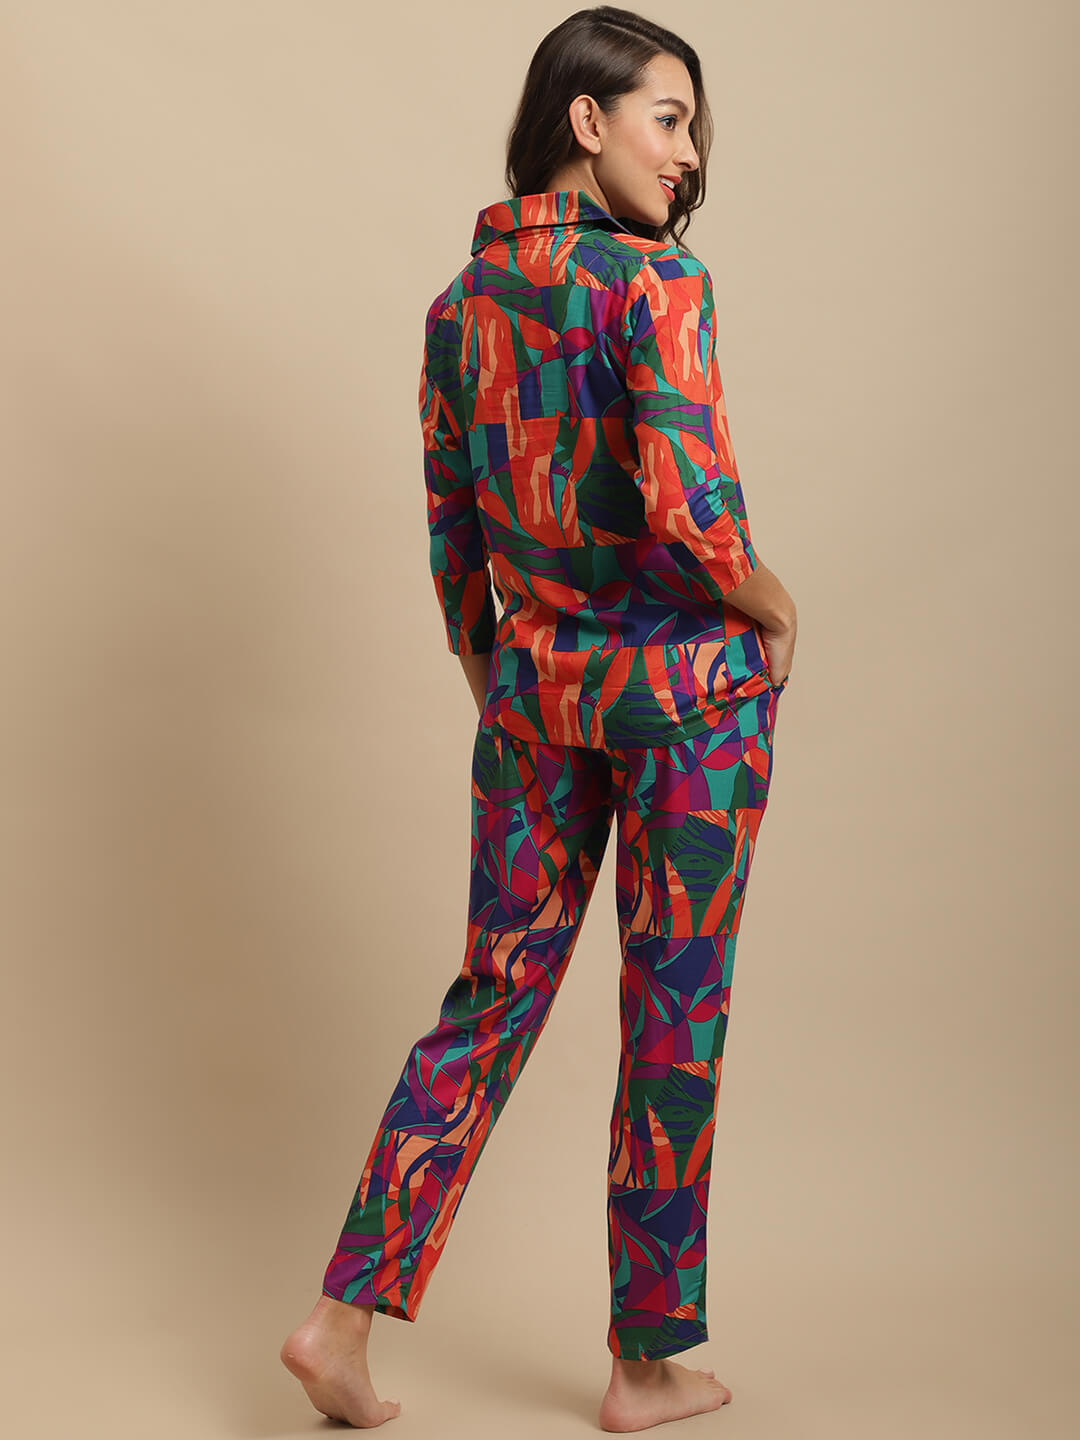 Multi Color Abstract Printed Cotton Nightsuit For Women Claura Designs Pvt. Ltd. Nightsuit Abstract Printed, Cotton, multi color, Nightsuit, Rayon, Sleepwear